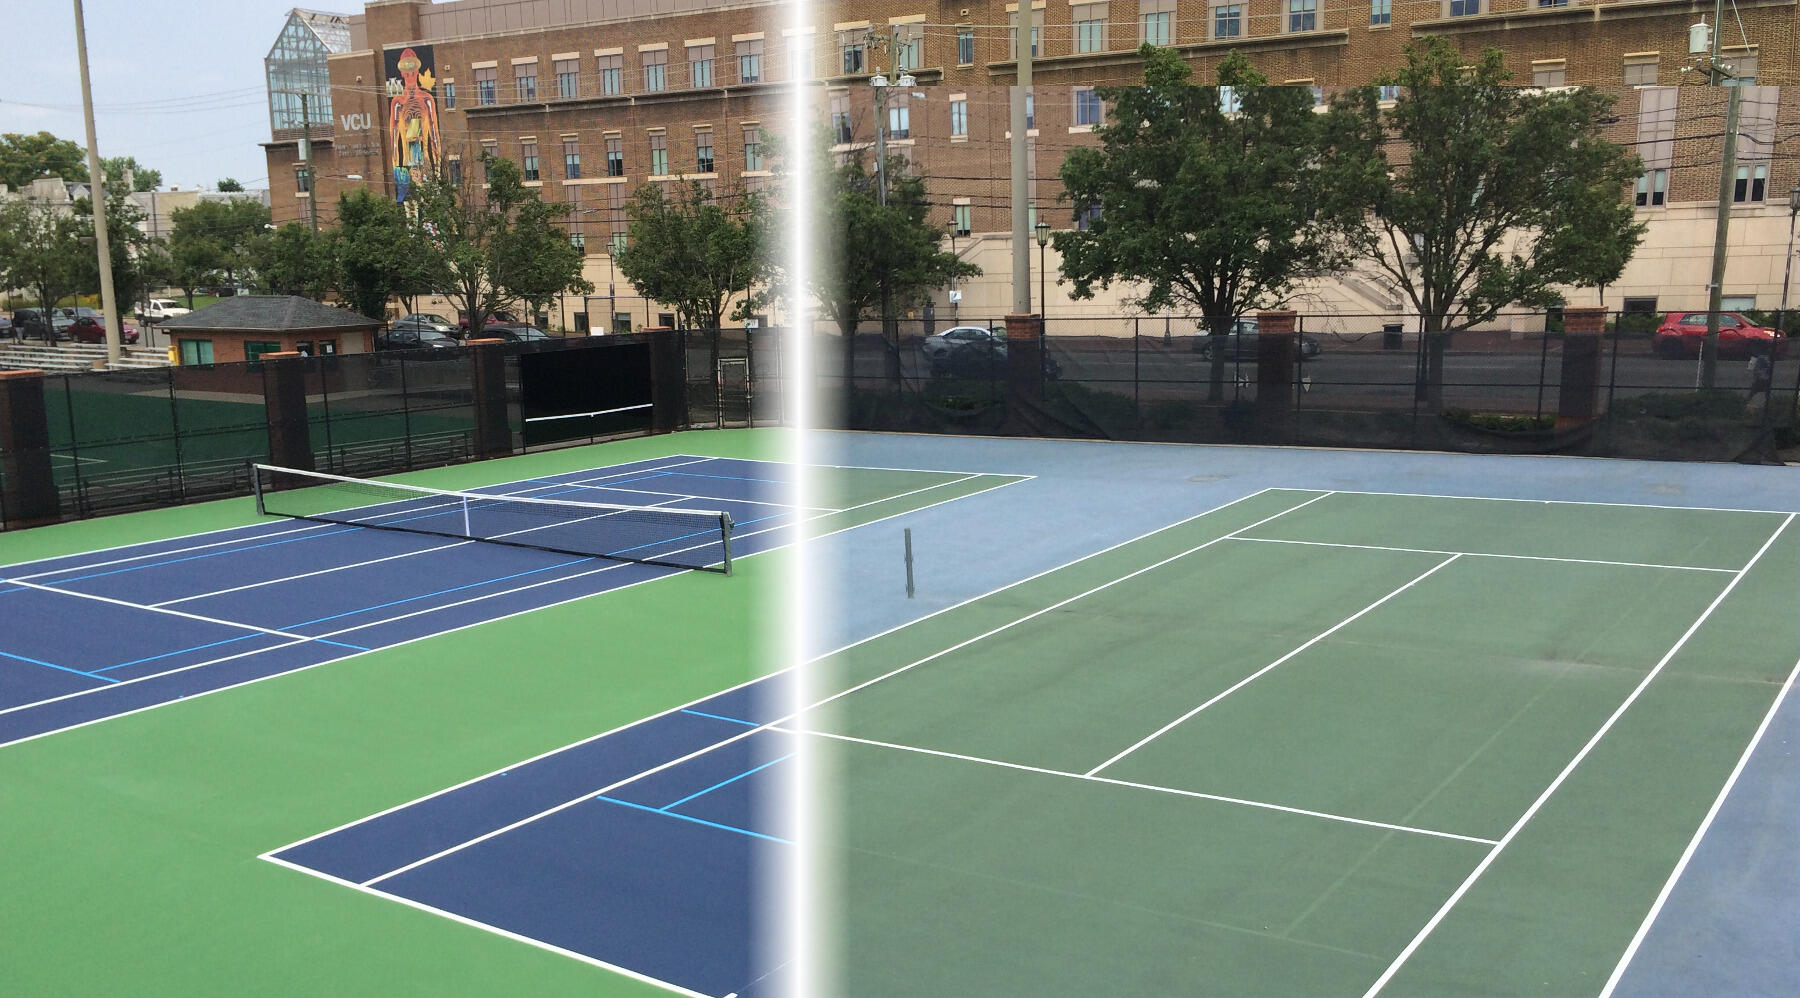 Tennis courts at the Mary and Frances Youth Center after the renovation project, at left, and prior to the renovation, at right. The center's courts now include QuickStart lines that shrink the size of the playing surface for younger children.